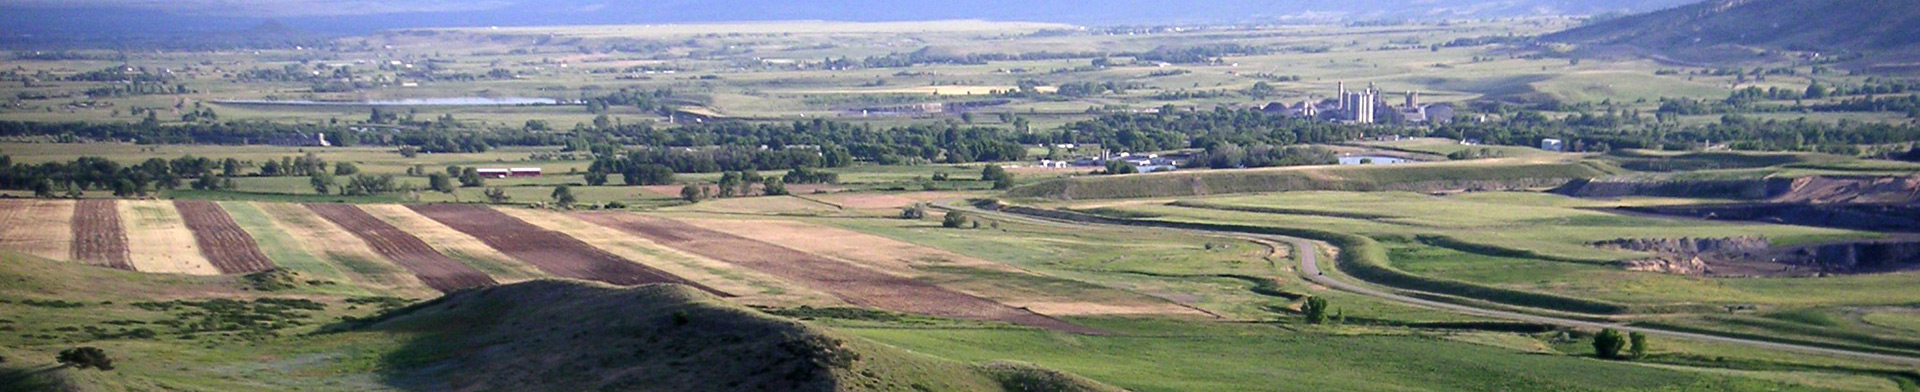 Boulder Valley farmland landscape, with mountains to the right